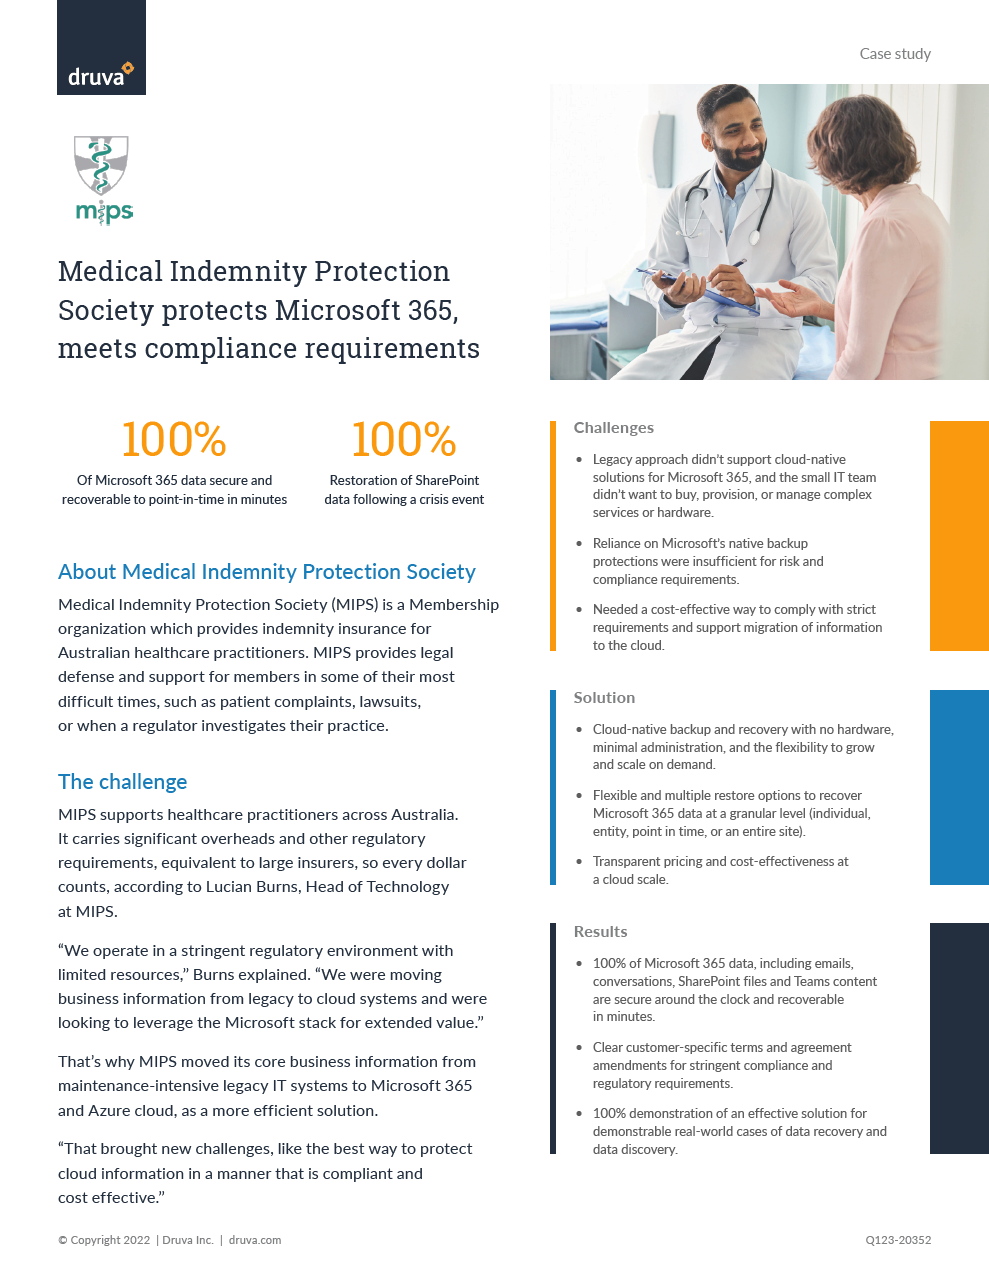 Medical Indemnity Protection Society protects Microsoft 365, meets compliance requirements